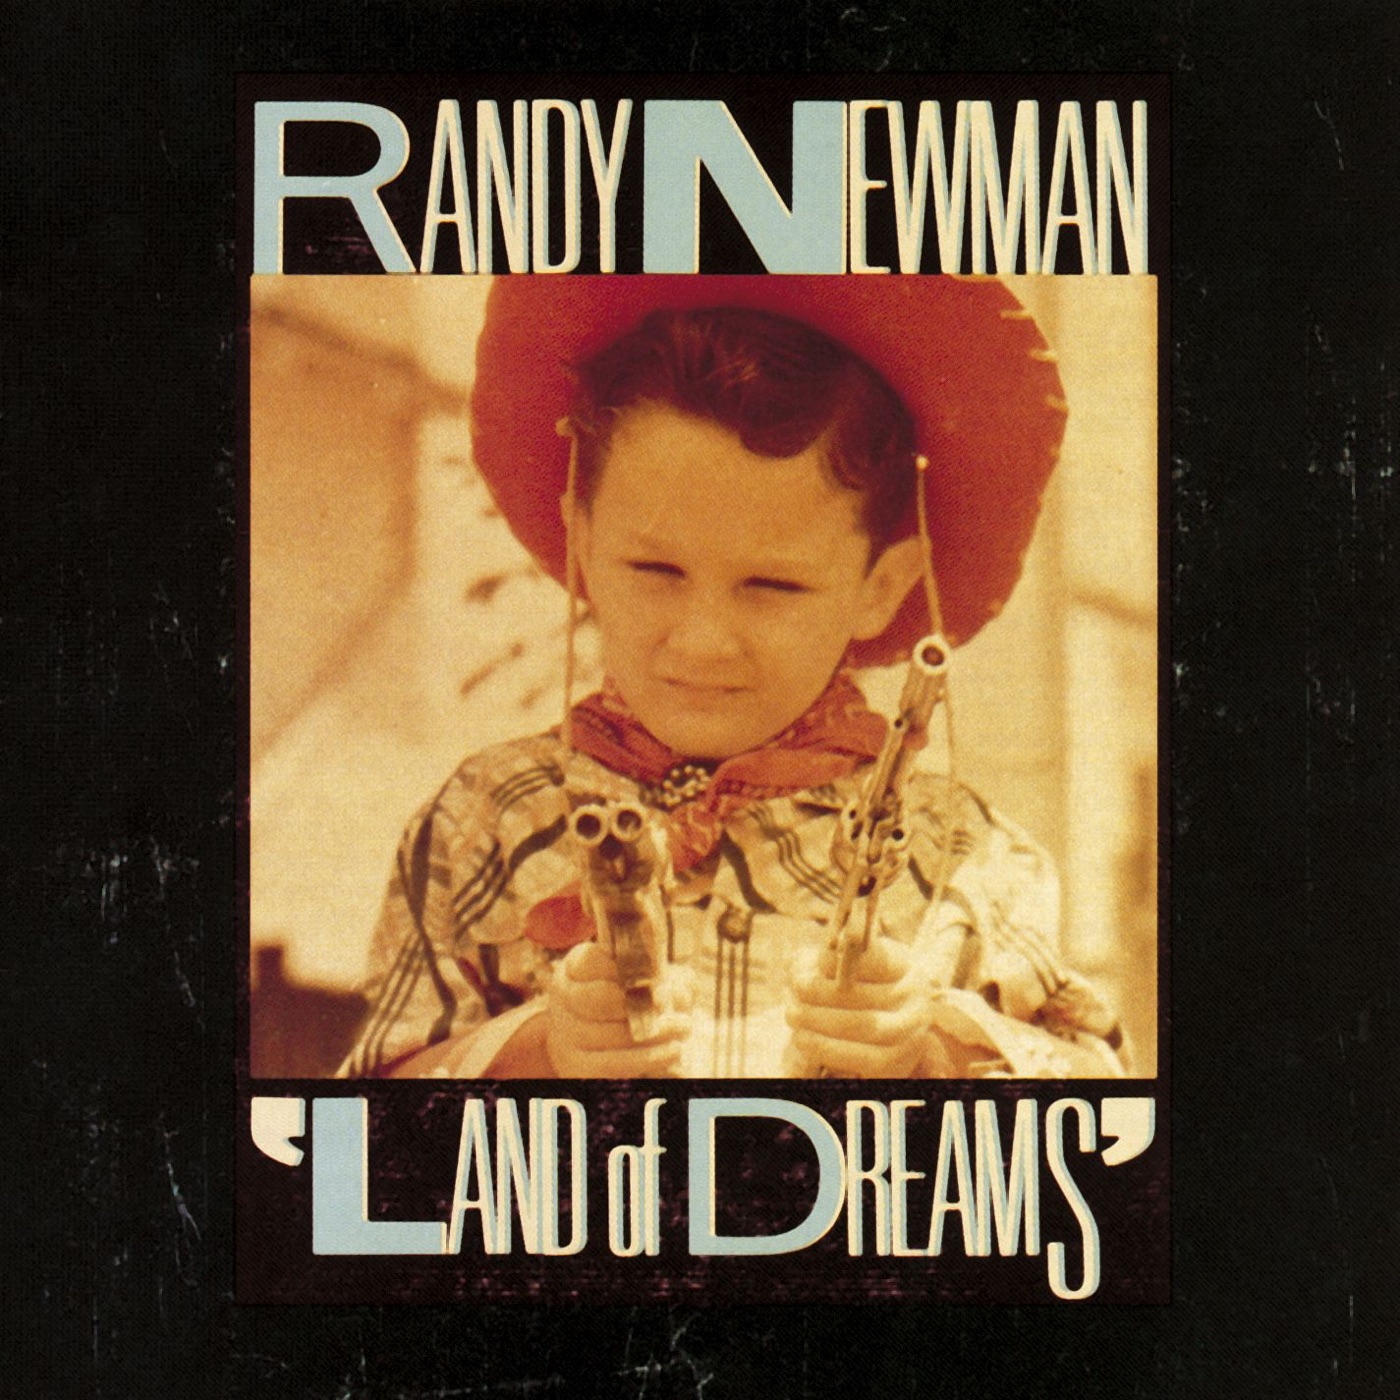 Land of Dreams by Randy Newman